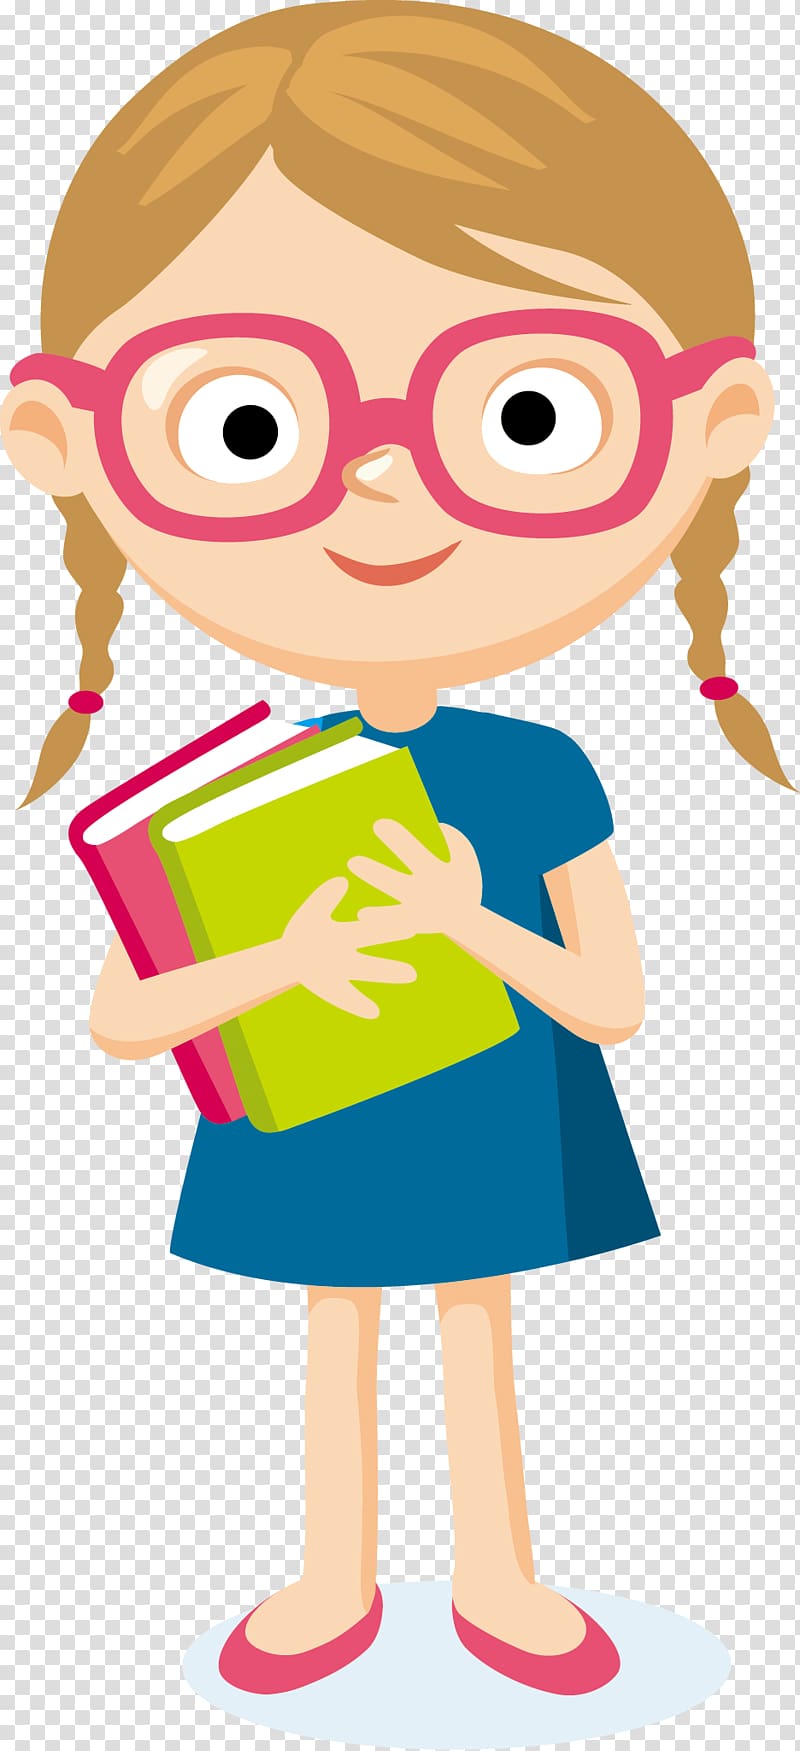 Student Cartoon, student, girl carrying two books illustration transparent background PNG clipart